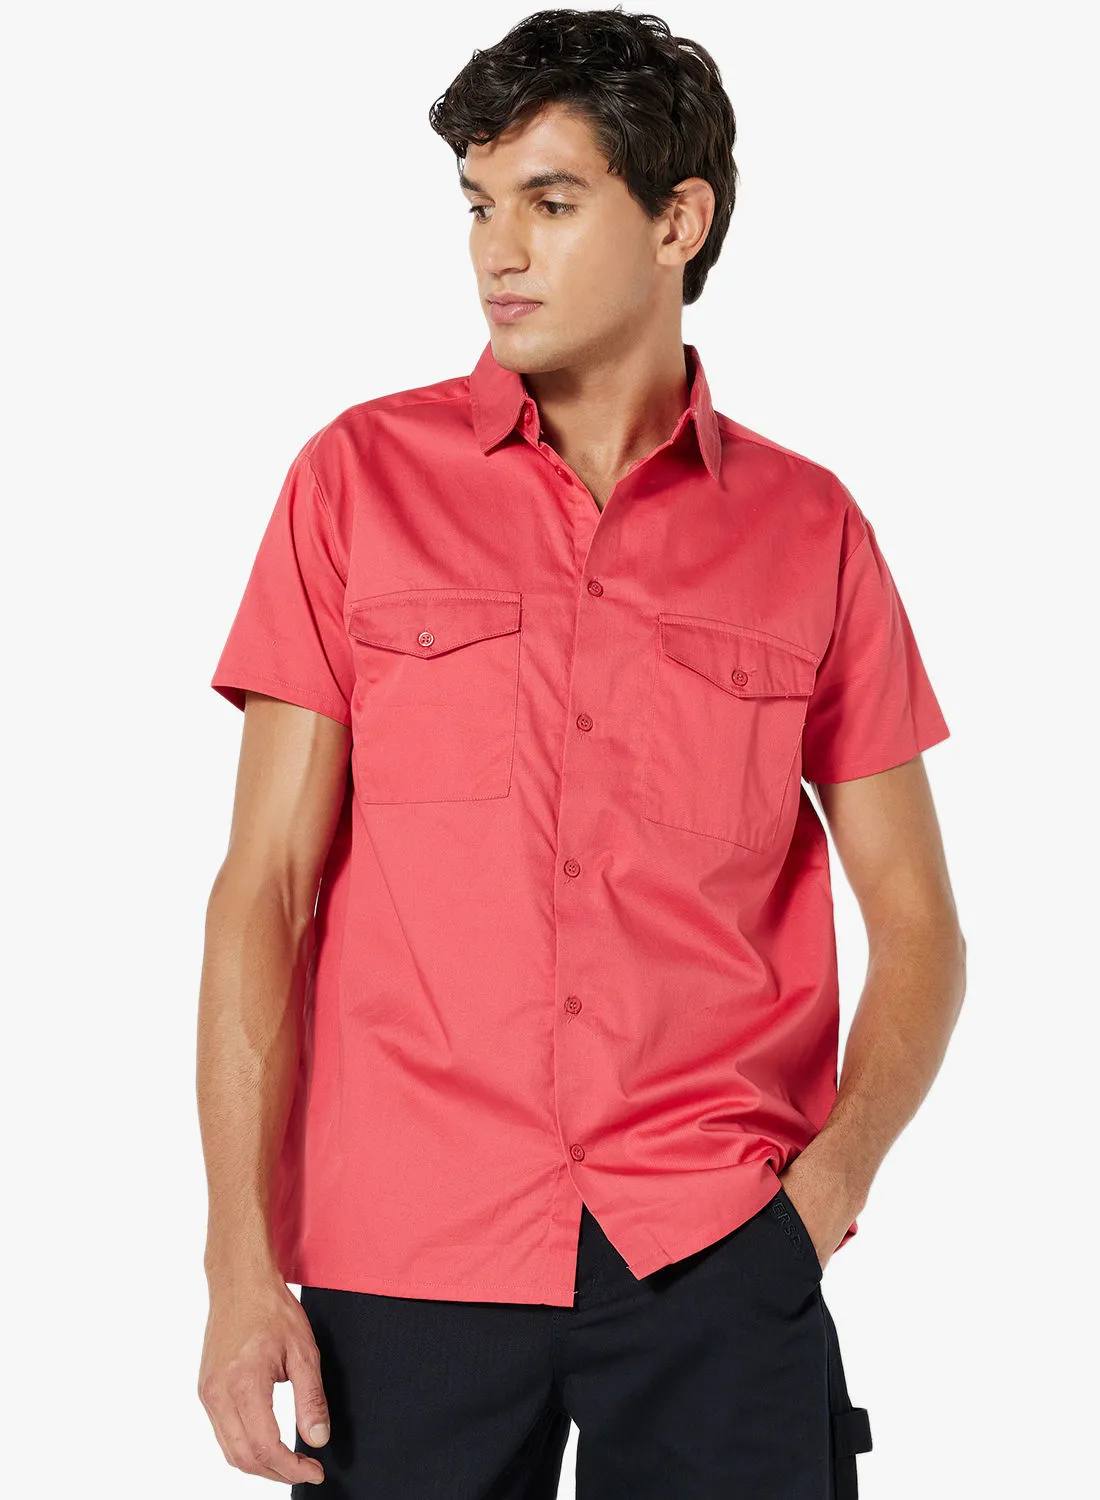 STATE 8 Front Pocket Shirt Red